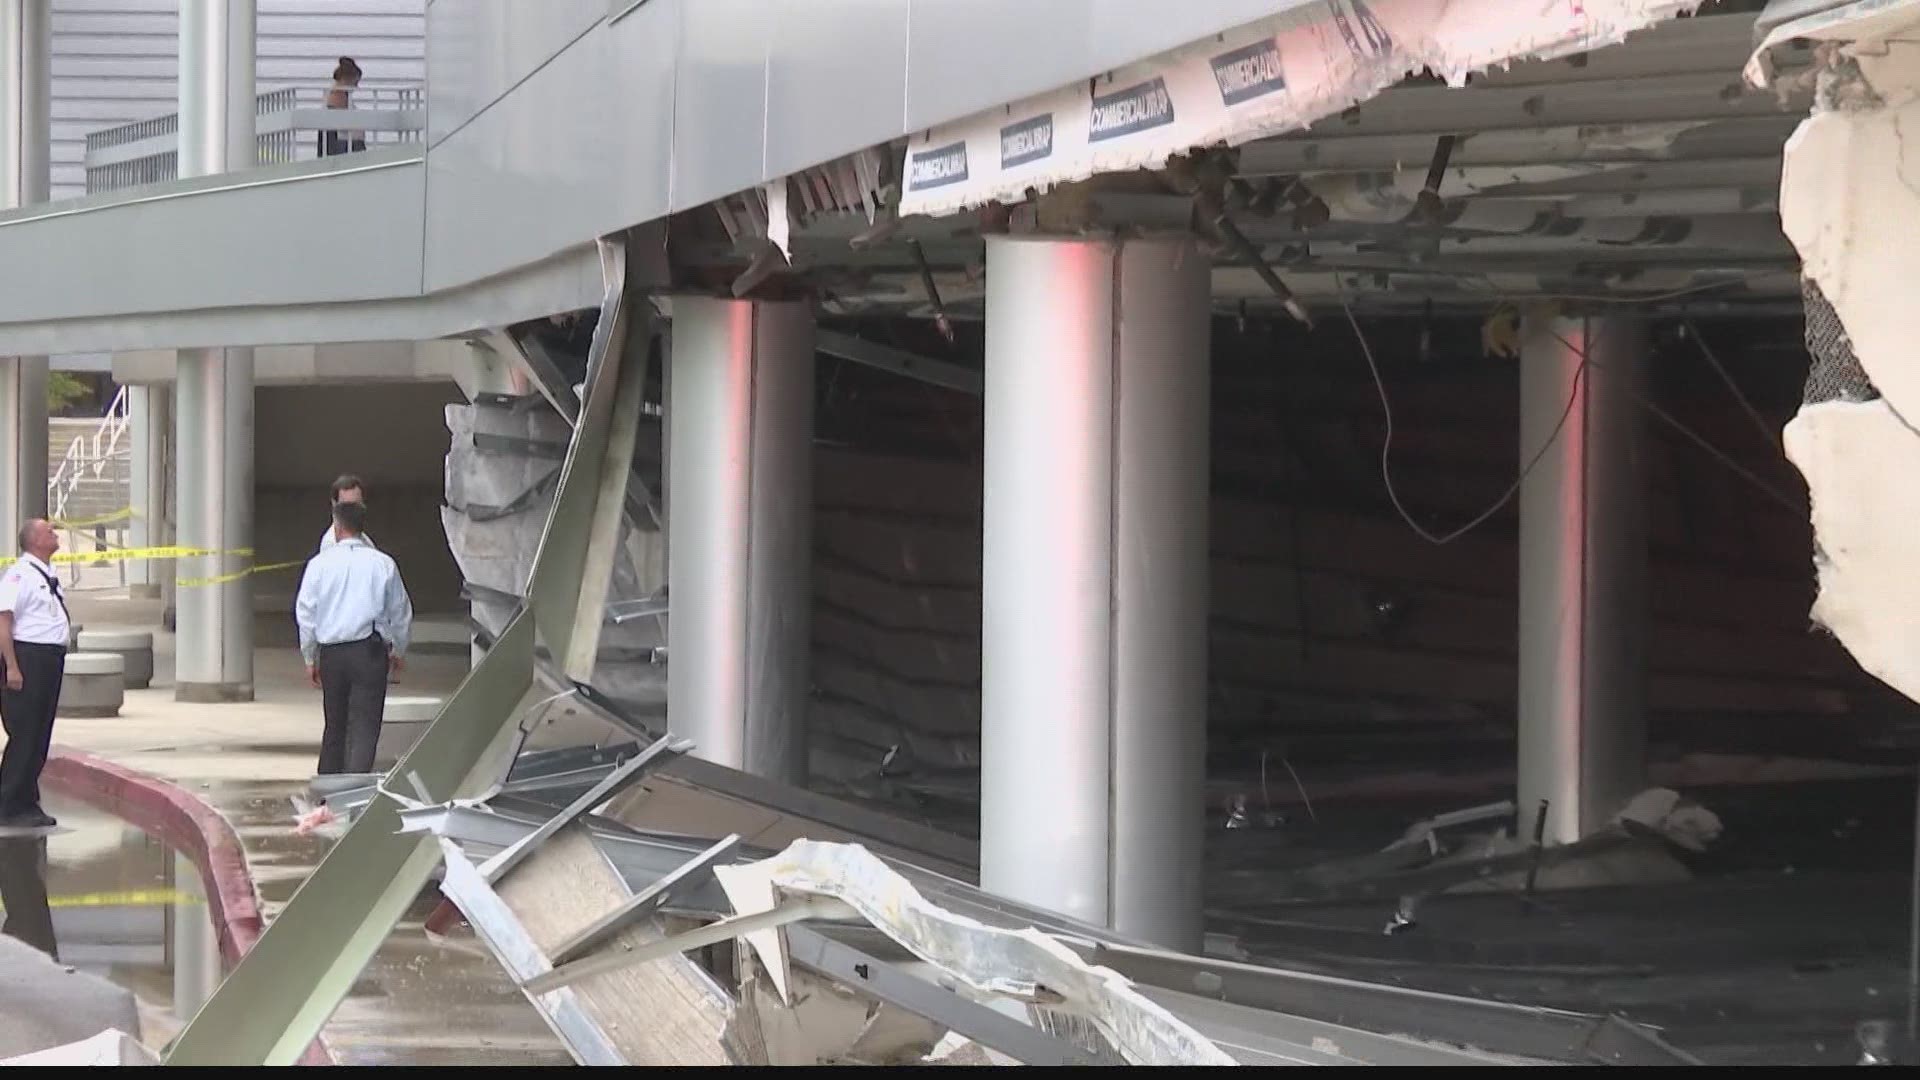 A section of the Von Braun Center under the dining area in Propst Arena collapsed on April 27.